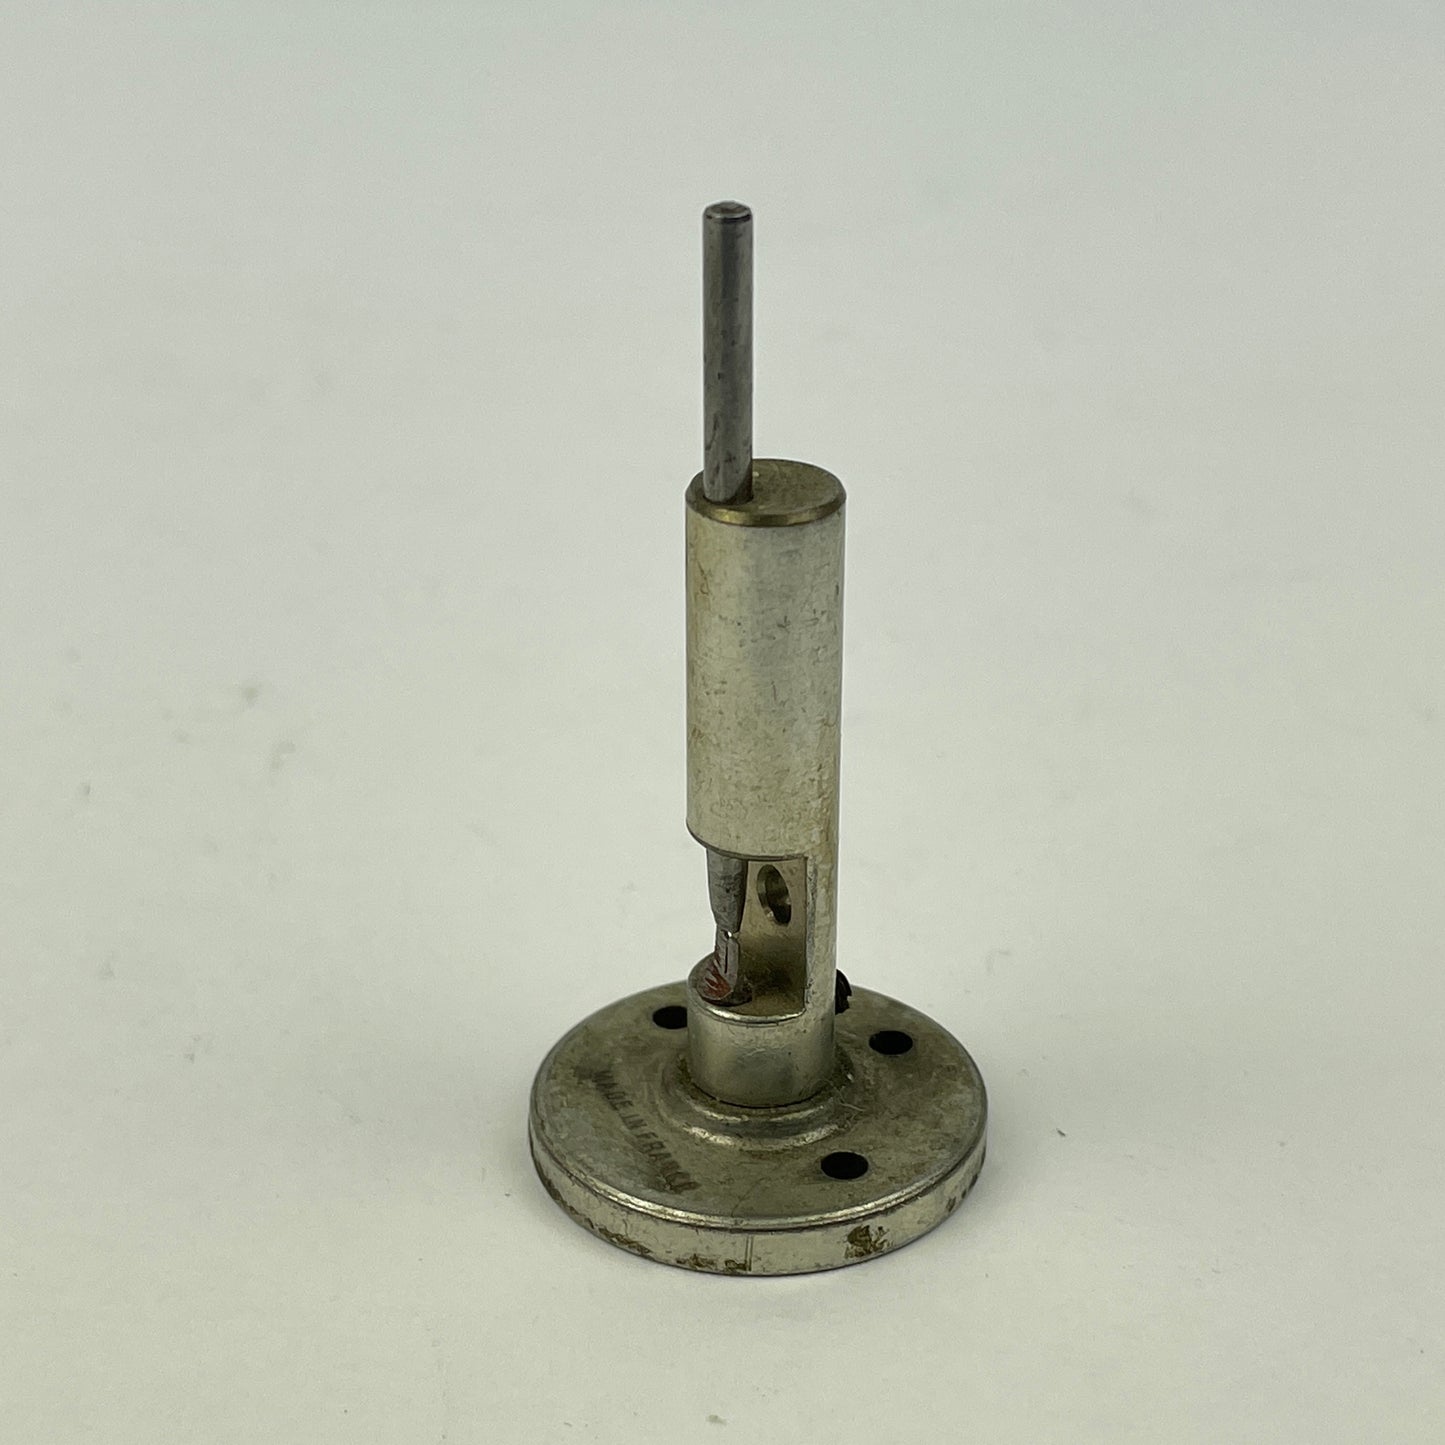 Lot 80- Watchmaker’s “CANNON” Pinion Tightener